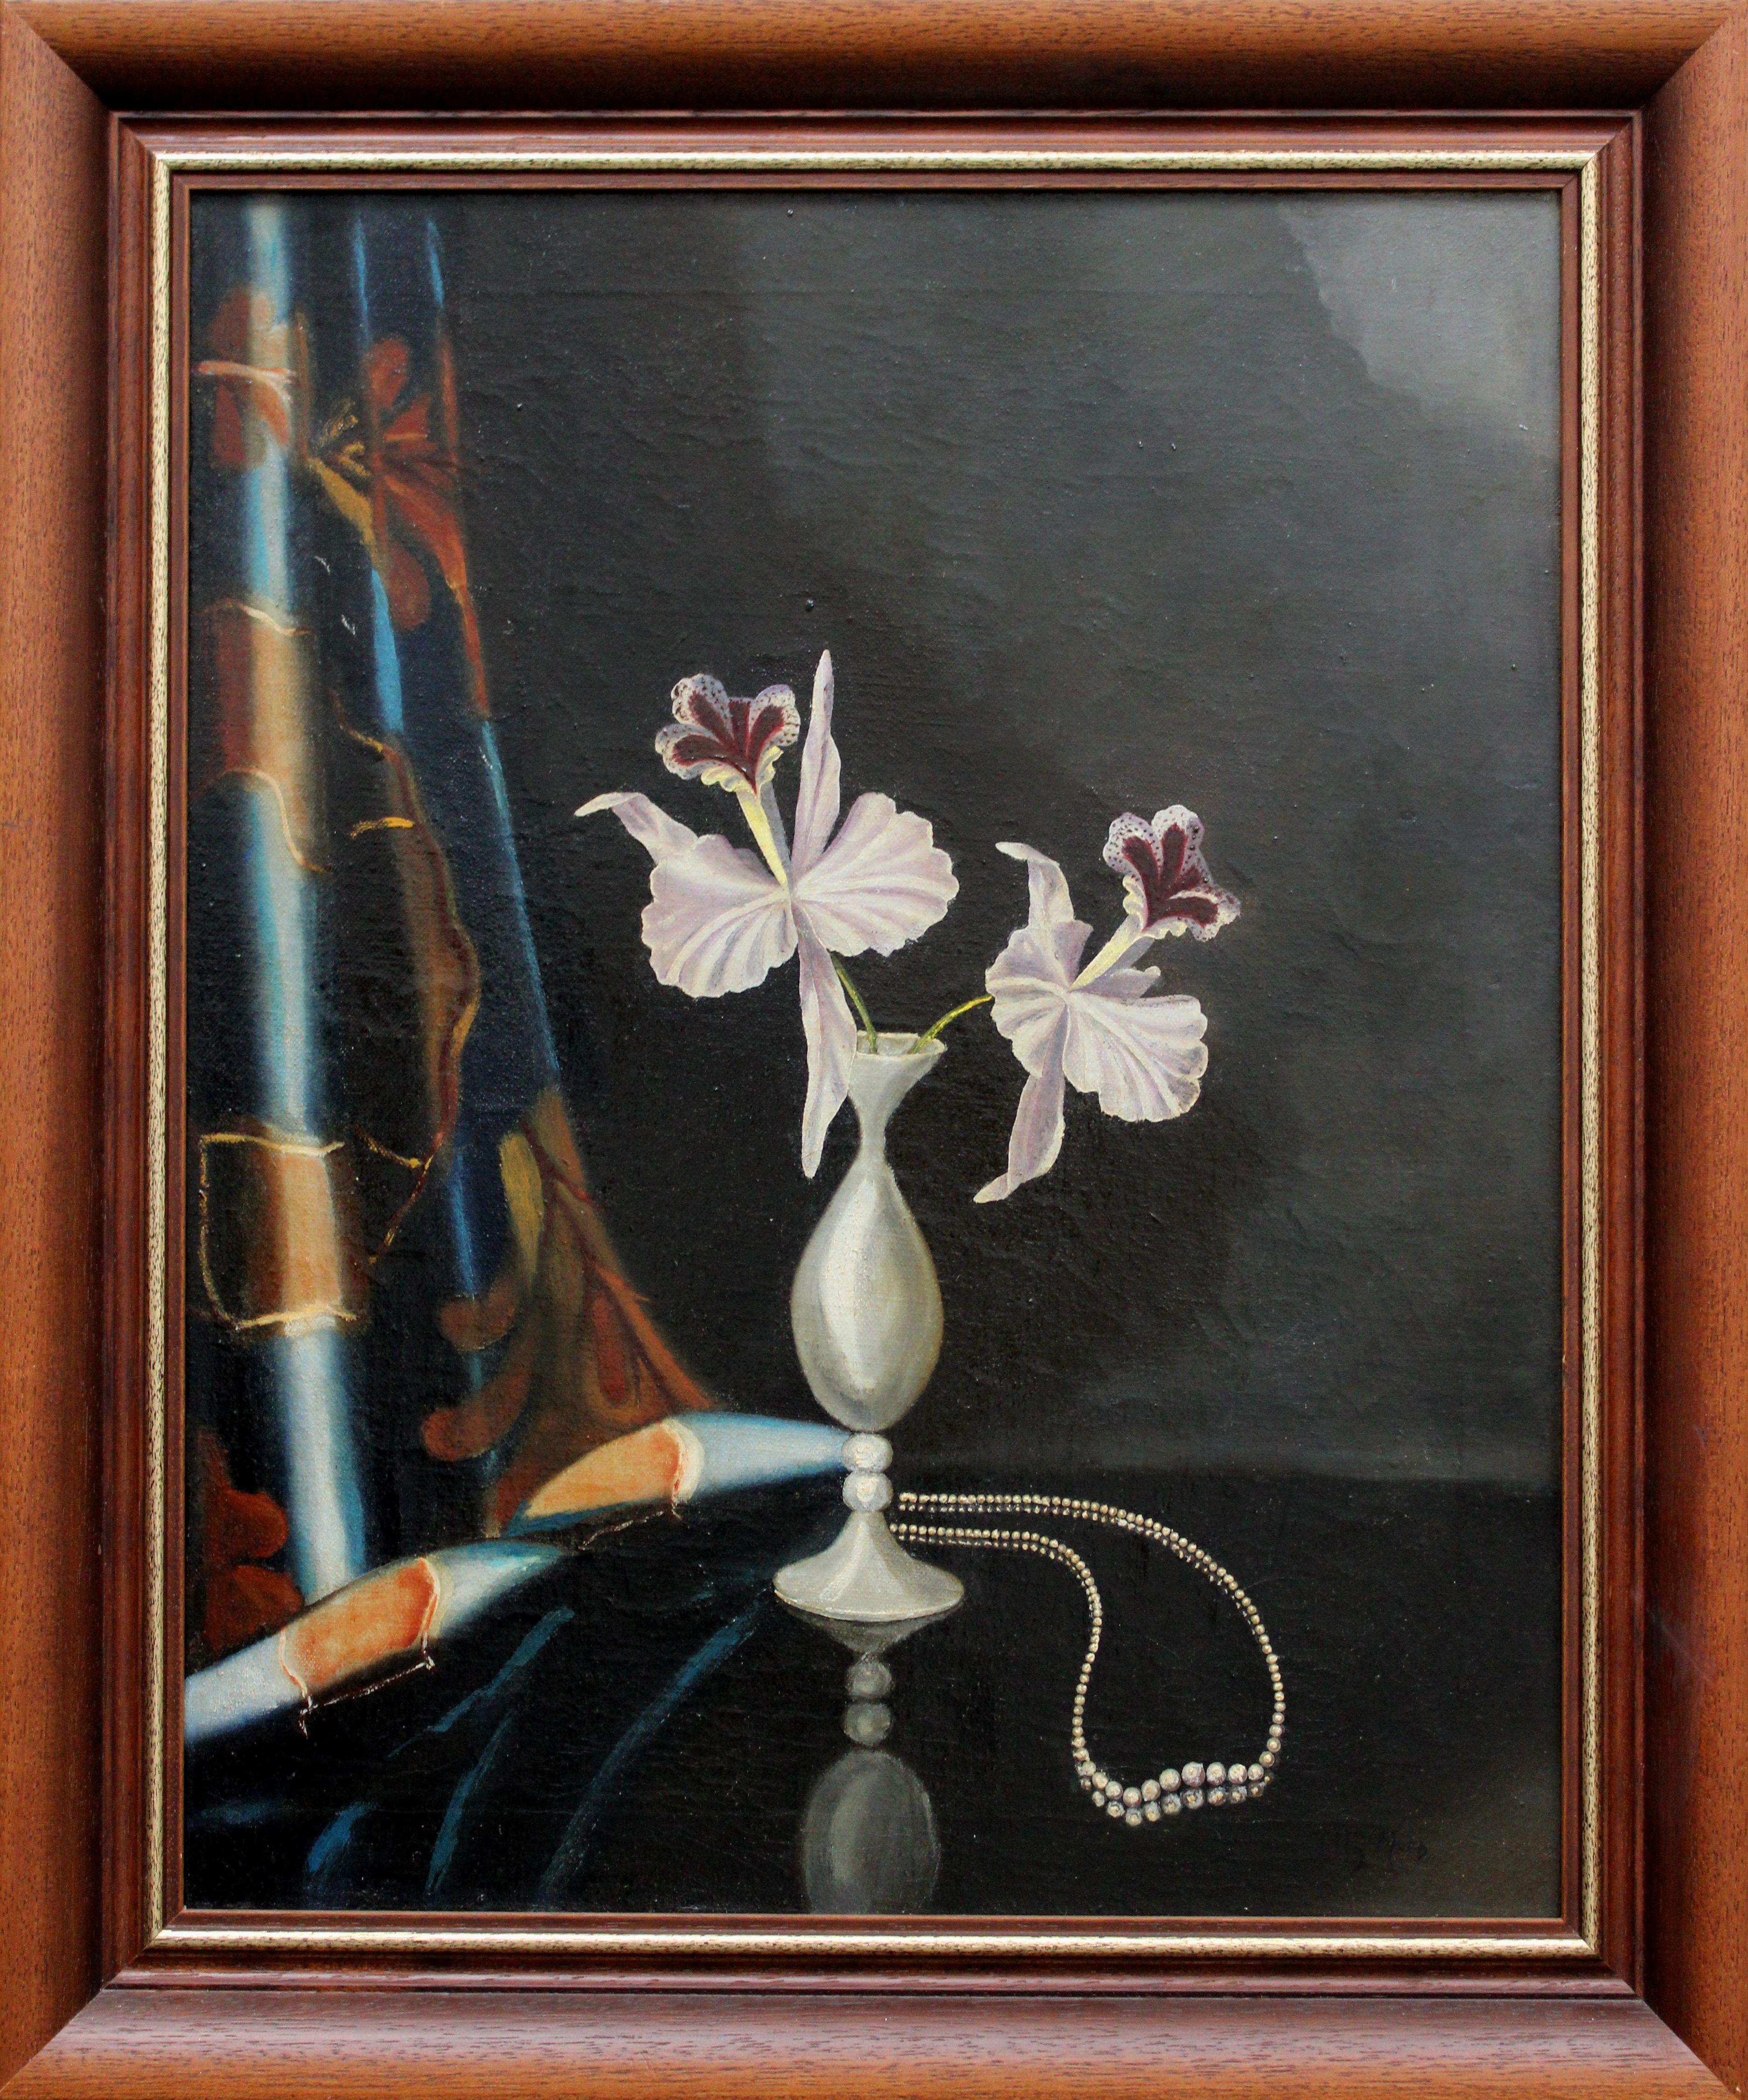 Still life with pearls. Oil on canvas, 50 x 40, 5 cm - Realist Painting by Tilly Moes